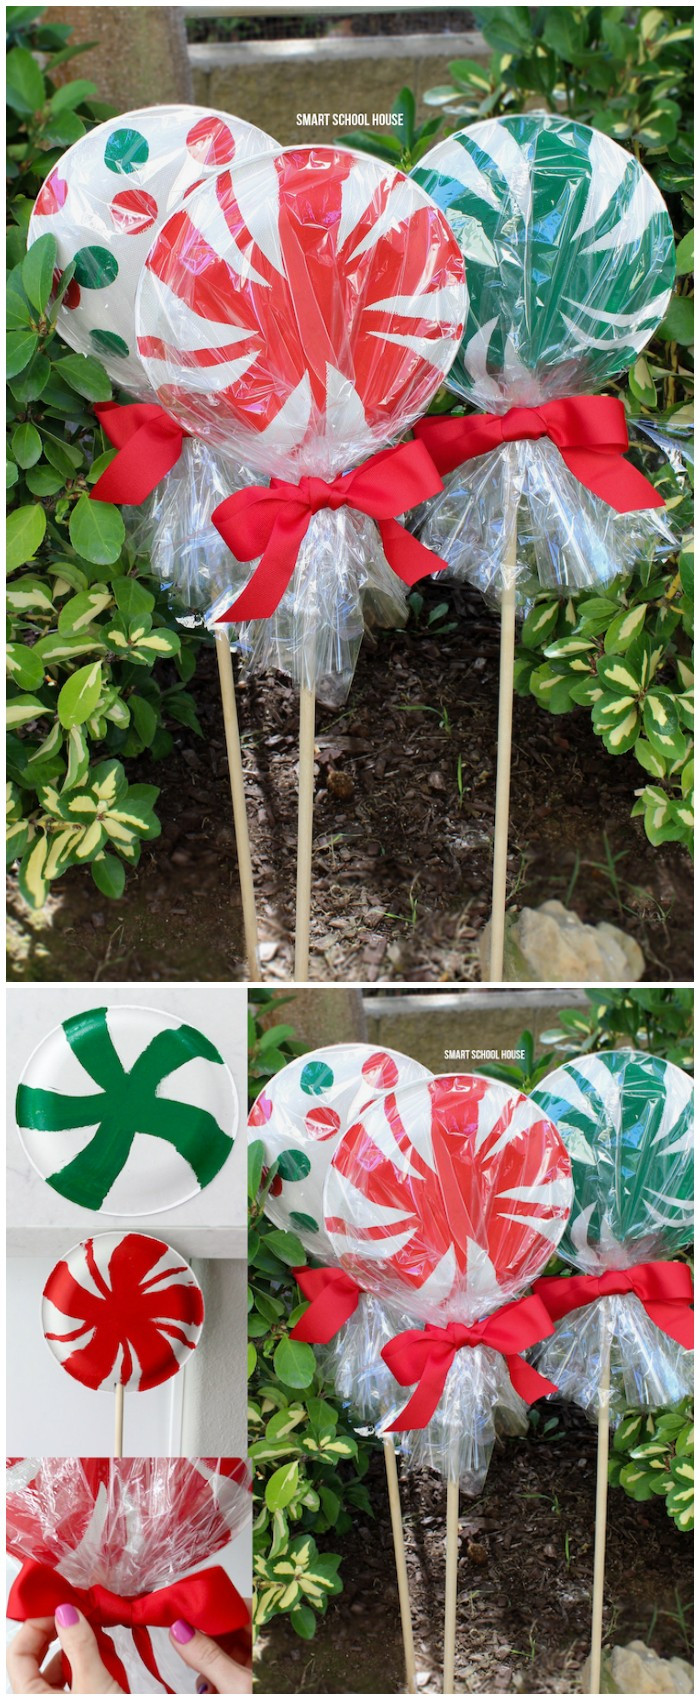 DIY Outdoor Christmas Candy Decorations
 21 Cheap DIY Outdoor Christmas Decorations • DIY Home Decor